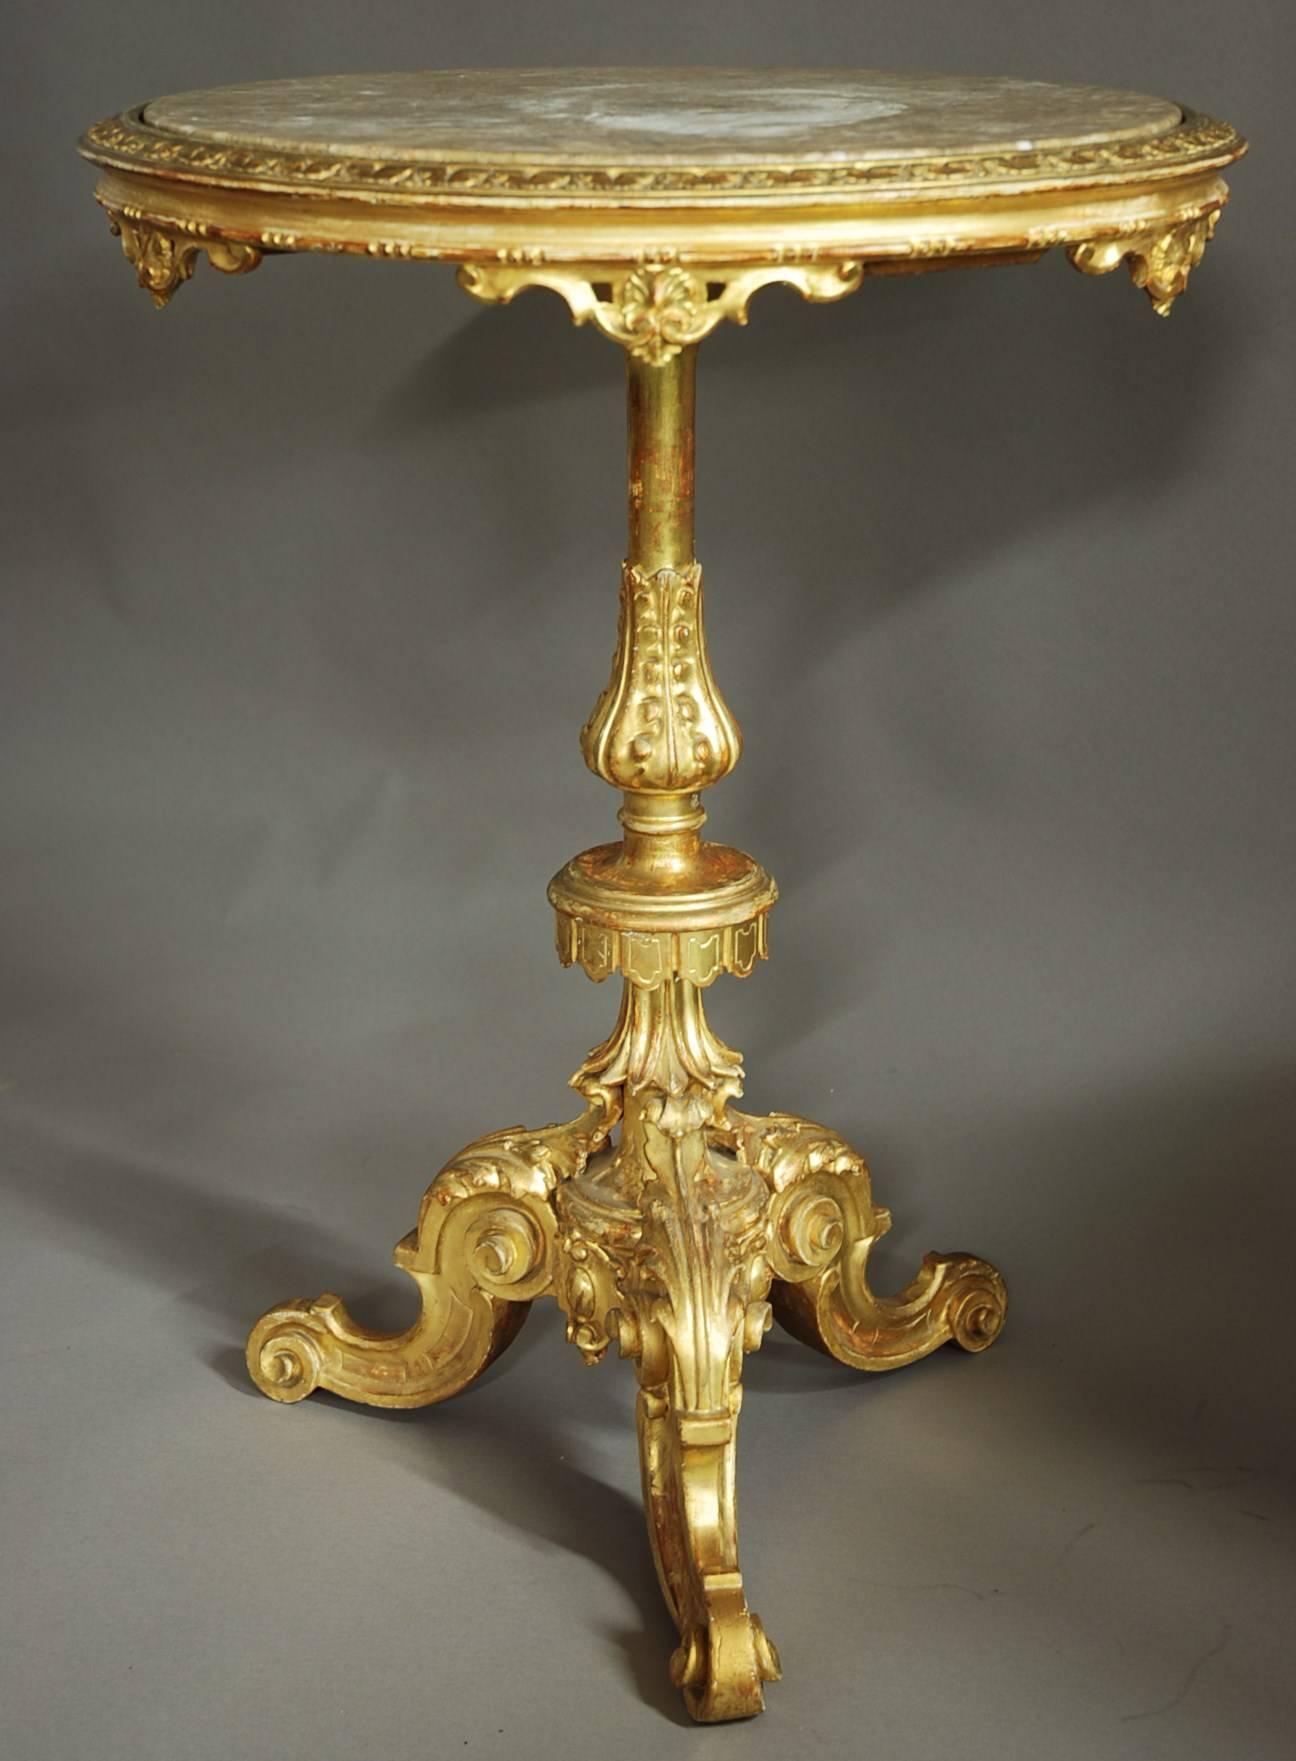 Decorative Late 19th Century Italian Carved Giltwood Marble-Top Centre Table 4